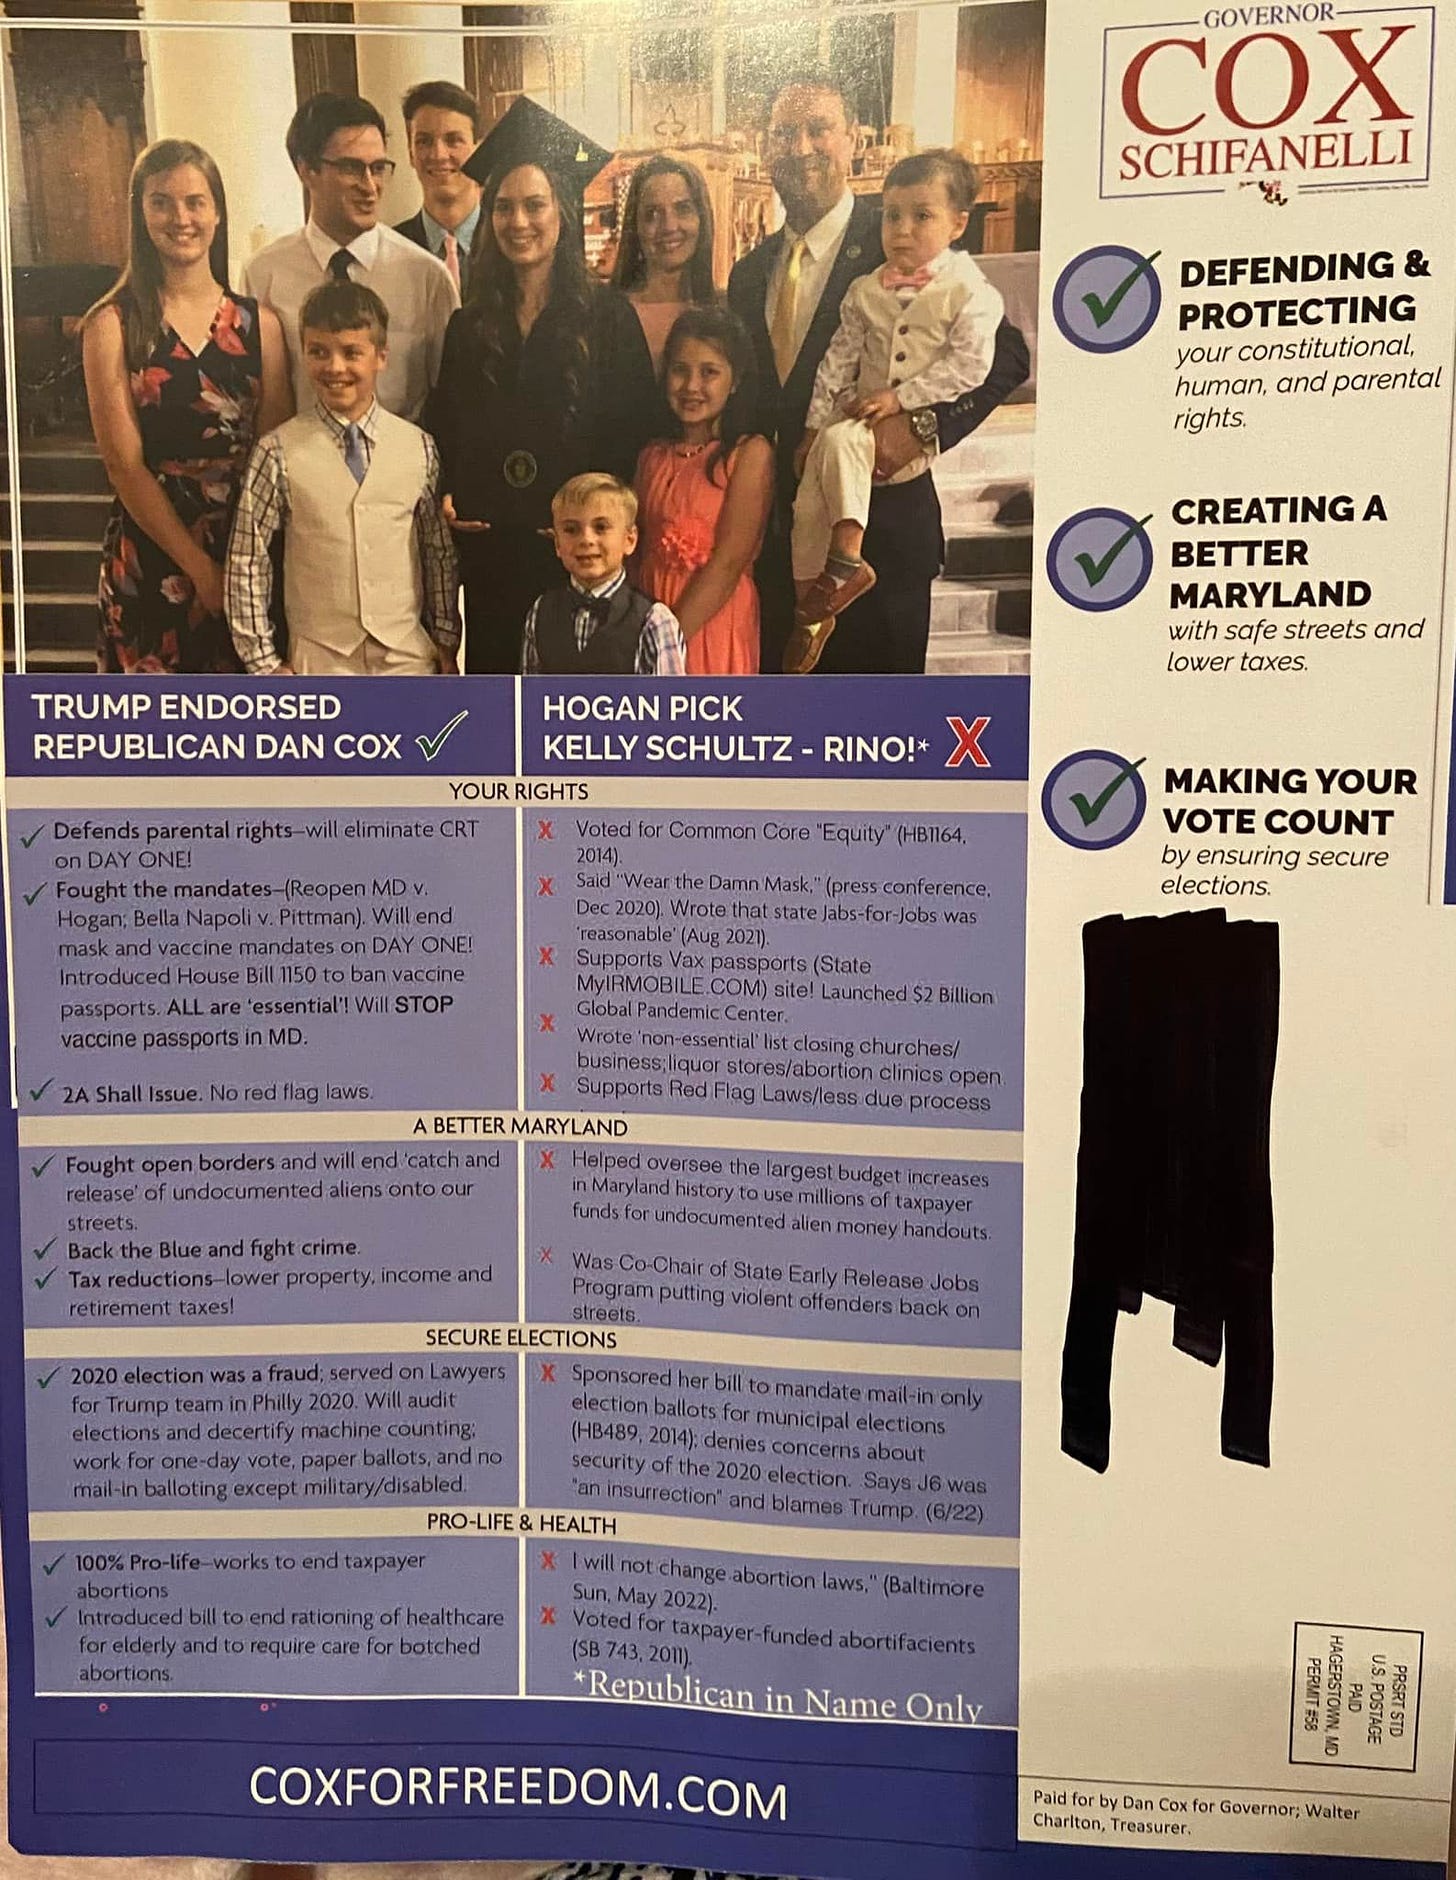 May be an image of 7 people, people standing and text that says 'COX GOVERNOR- SCHIFANELLI DEFENDING & PROTECTING yourconstitutional, human and parental rights. TRUMP ENDORSED REPUBLICAN DAN COX parental CREATINGA BETTER MARYLAND with safe streets and lower taxes. HOGAN PICK KELLY SCHULTZ RINO!* YOURRIGHTS Equity"(HB1164, MAKING YOUR VOTE COUNT by ensuring secure elections. BETTERMARYLAND SECUREELECTIONS troducebilo. *Republican Name Only COXFORFREEDOM.COM Paid Dan Coxfo Governor; Walter Chariton, reasurer.'